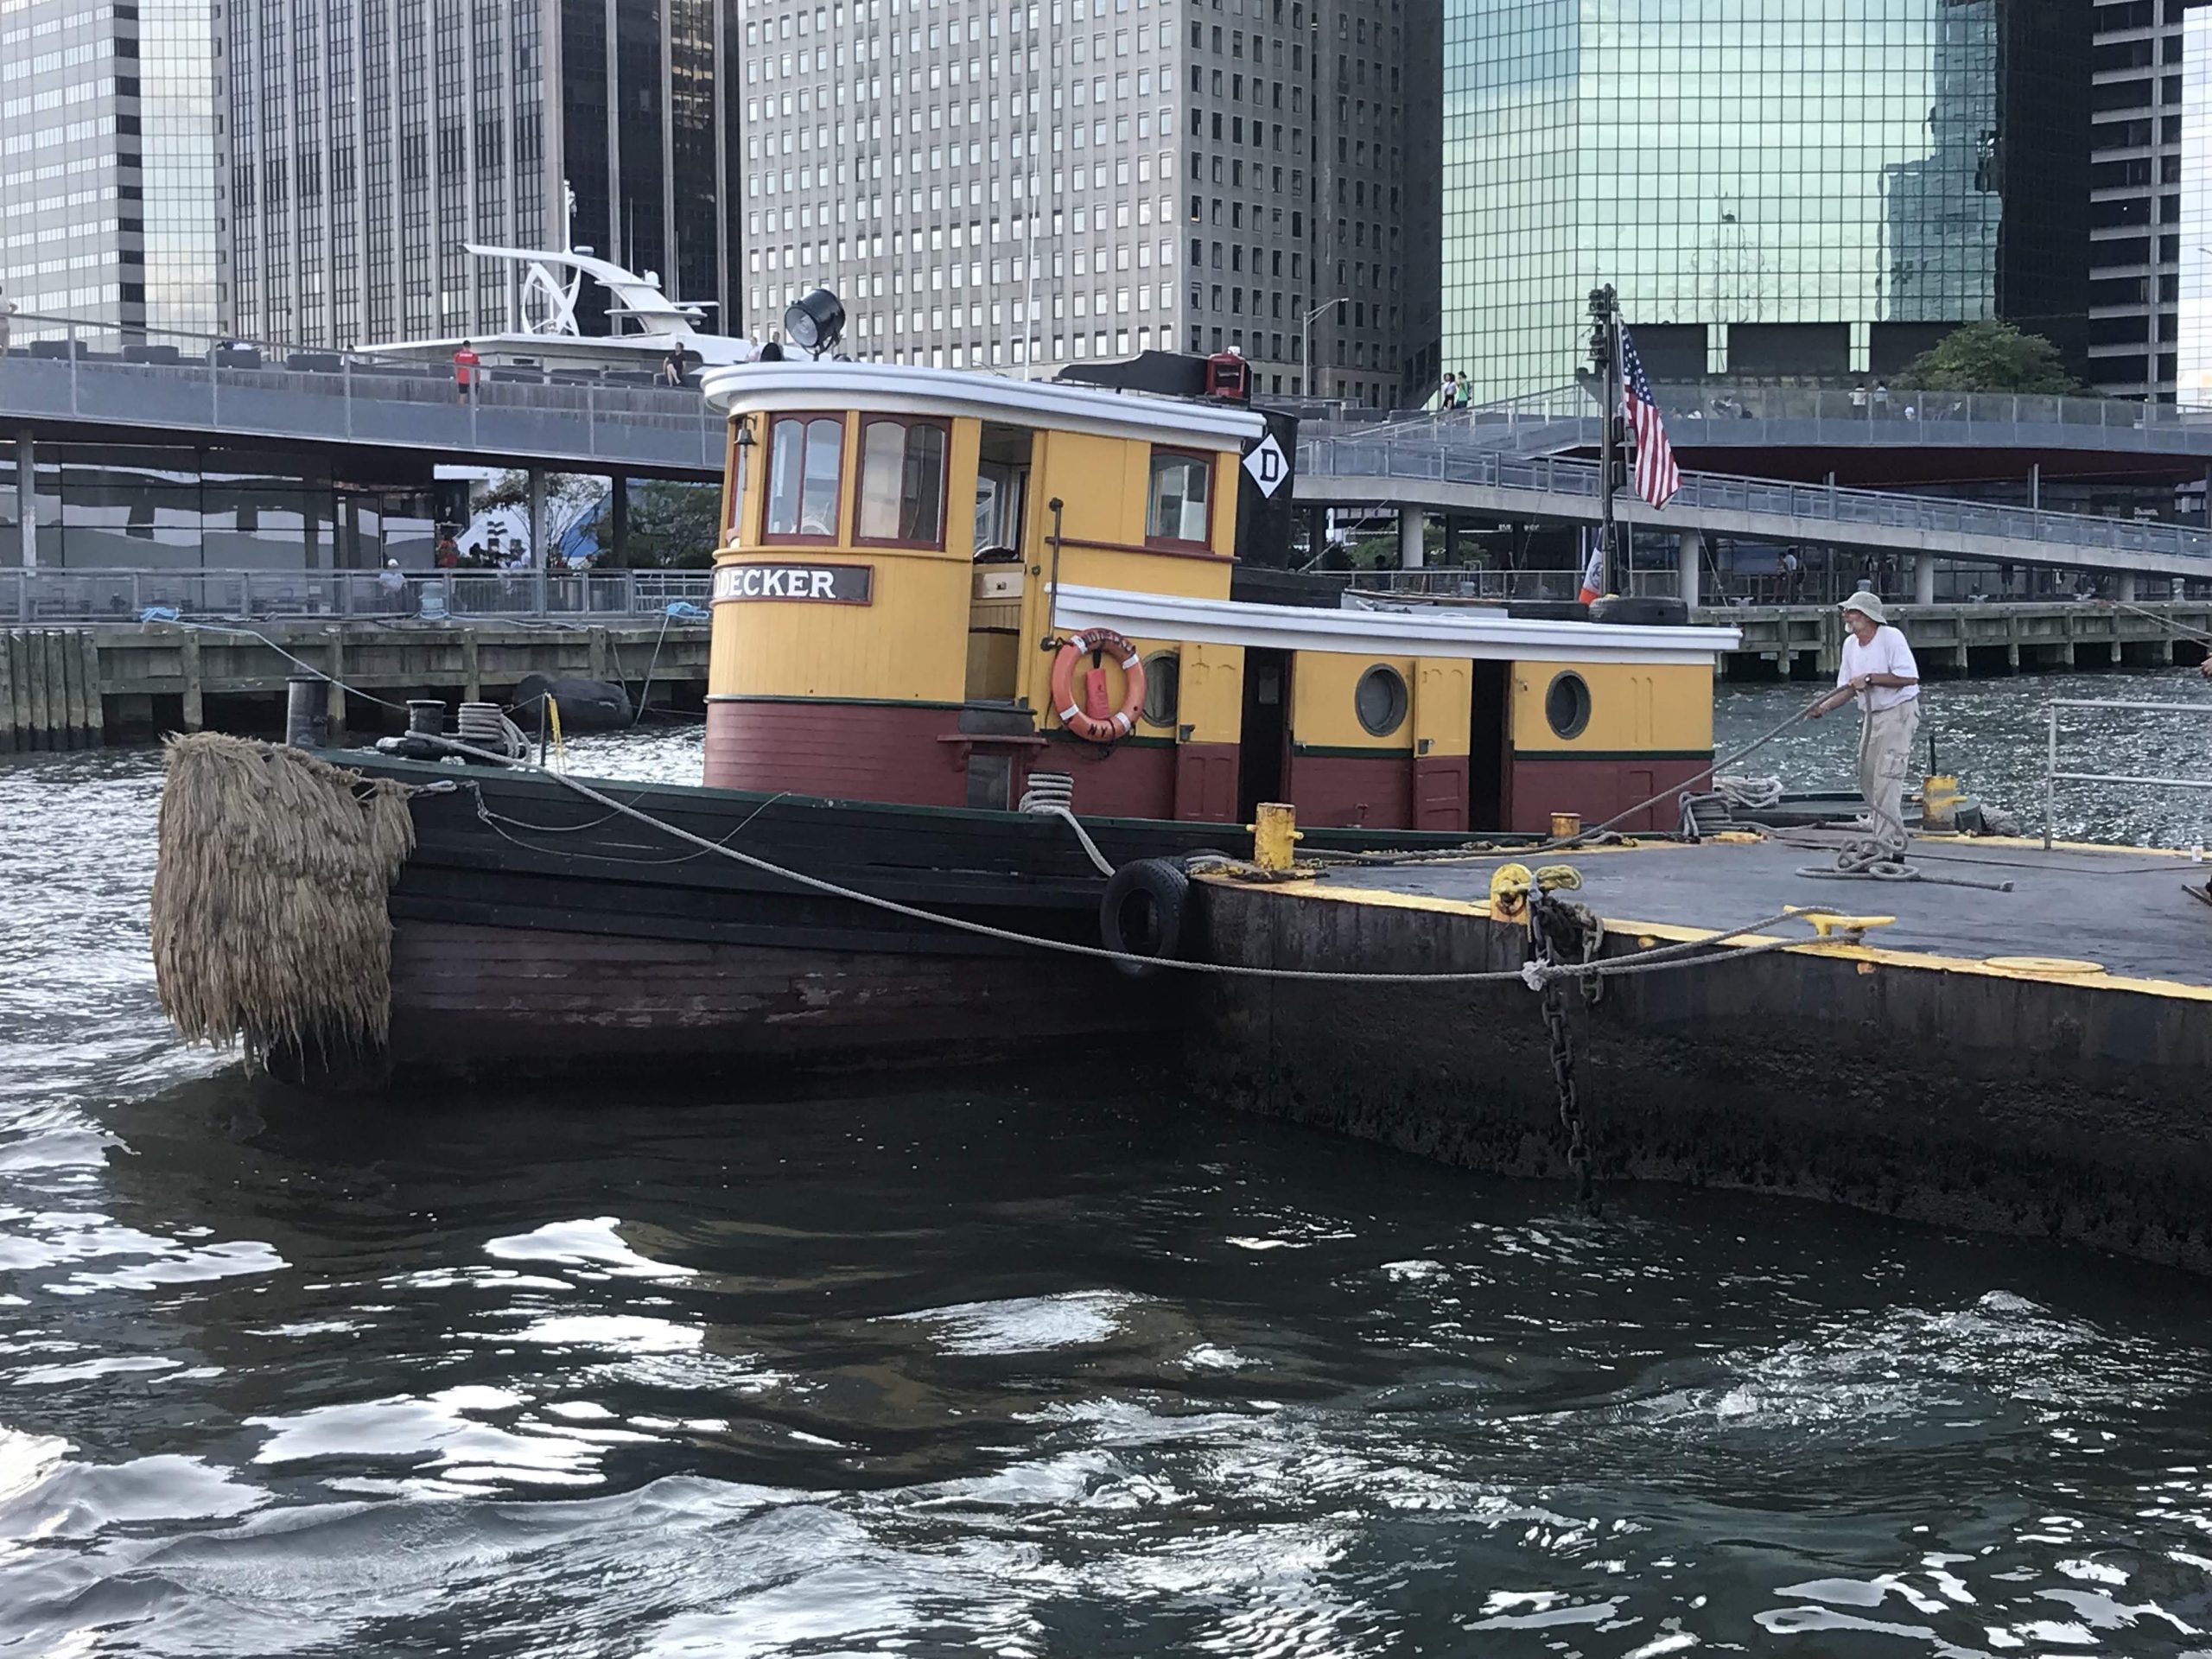 Take a Ride on New York Harbor’s Historic Tugboat